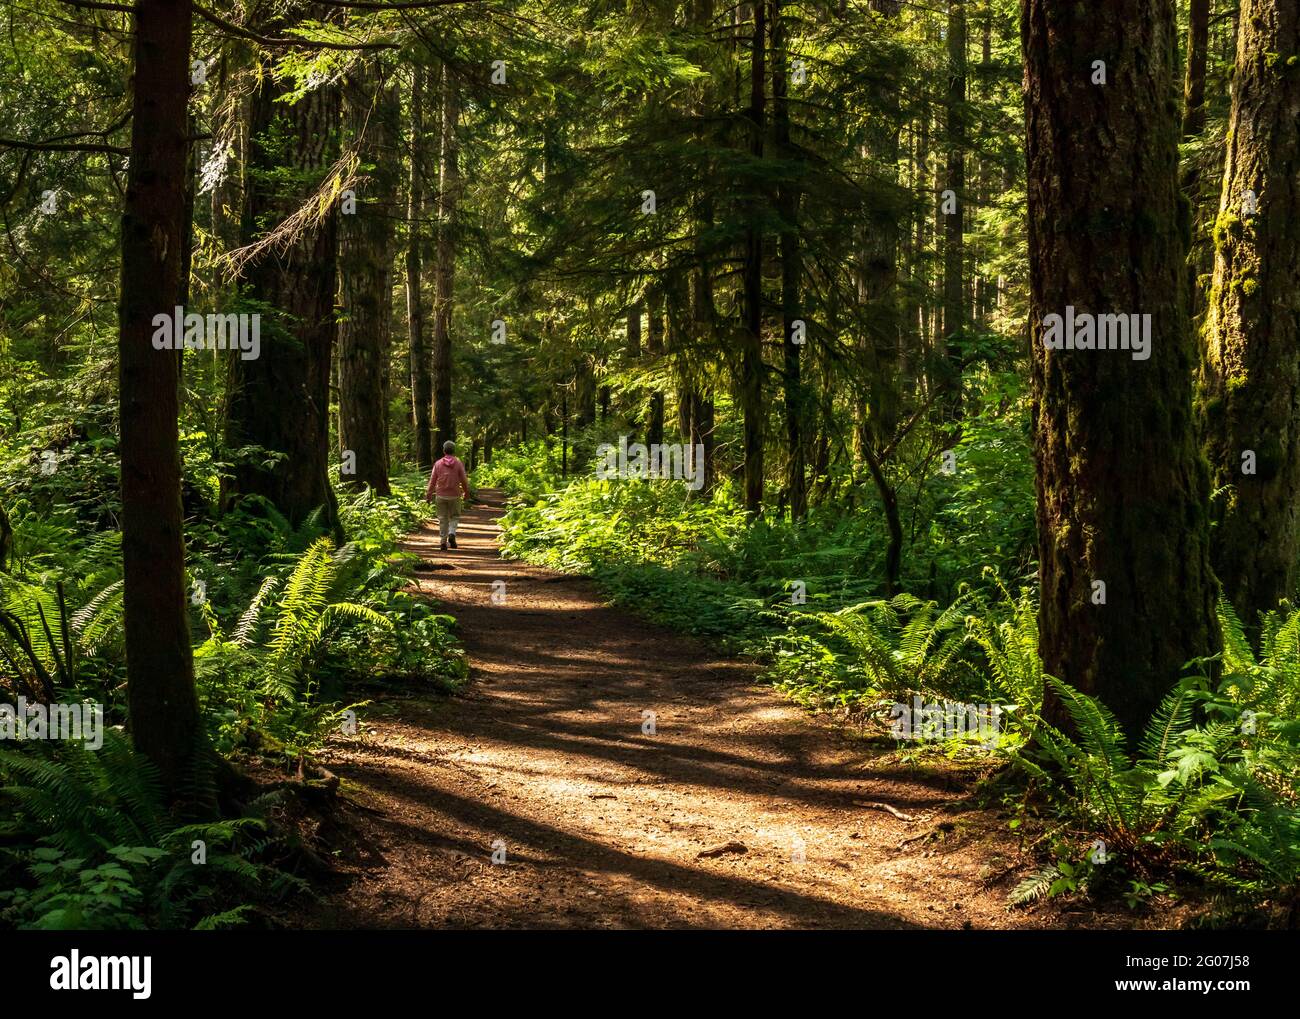 Senior woman with pink sweater, walking along a forest trail, with green brush, fir and hemlock trees, sun and shade on path.  Canadian forest. Stock Photo